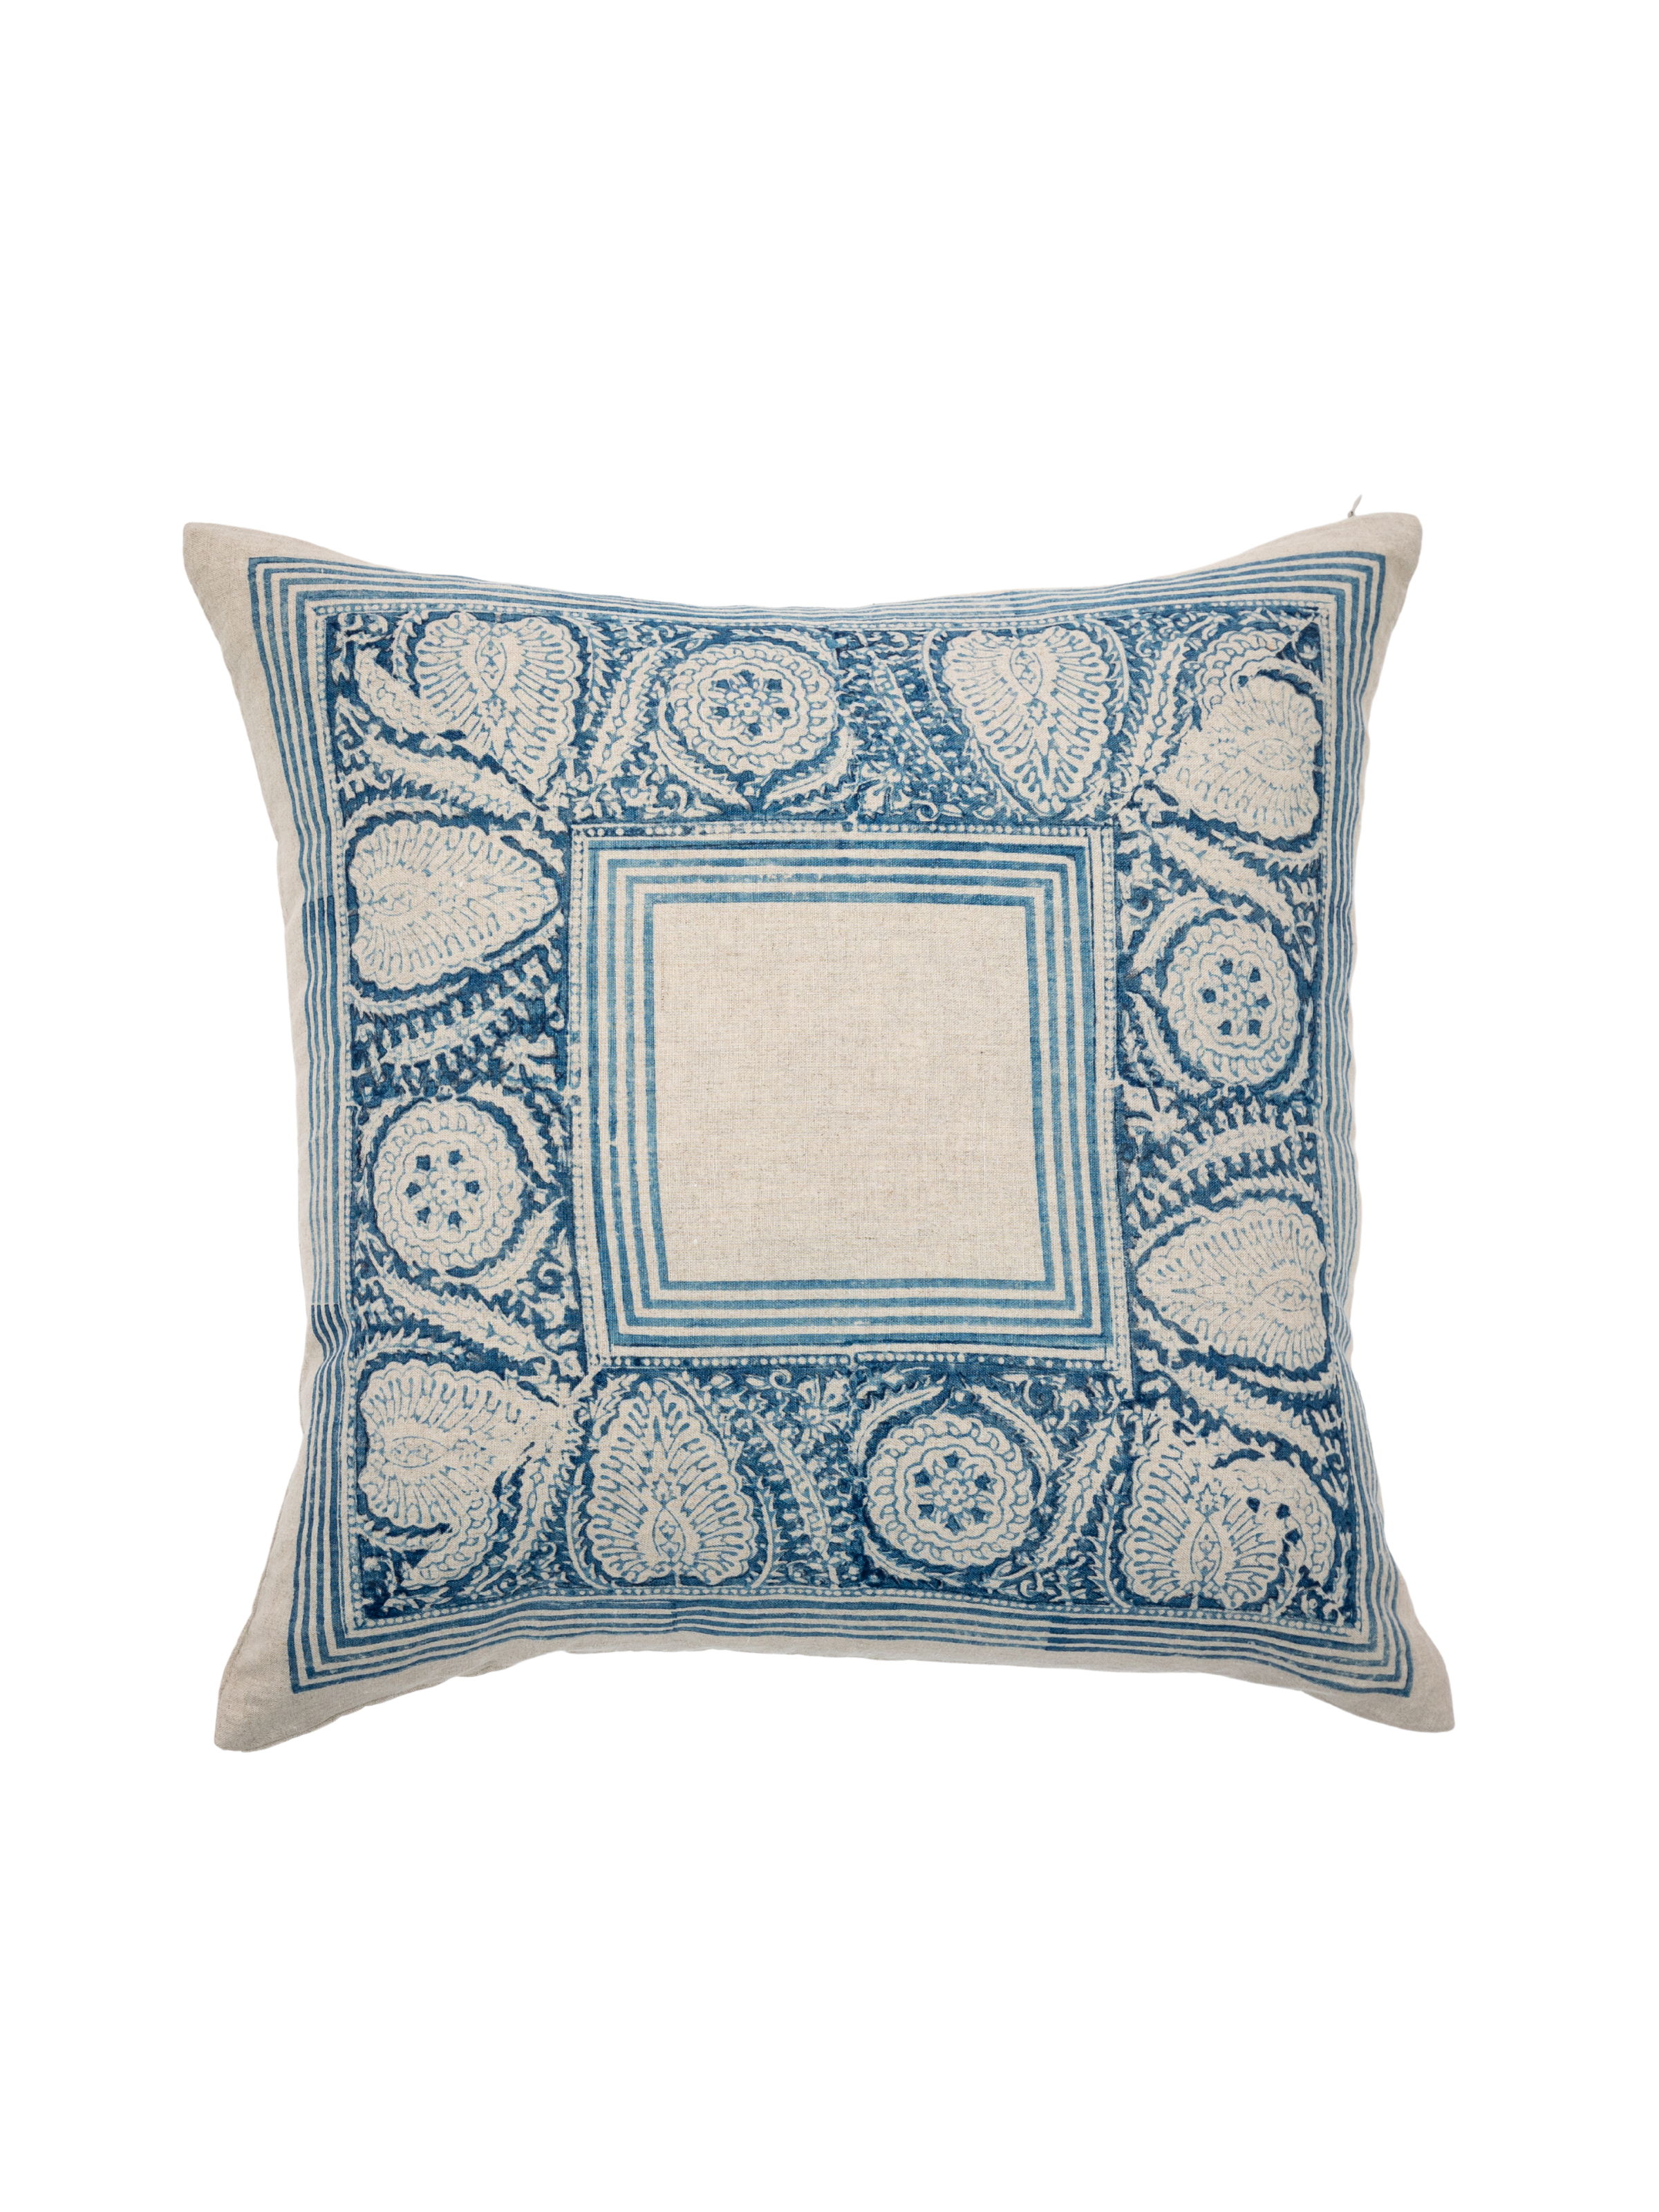 Istanbul Border Decorative Pillow Cover